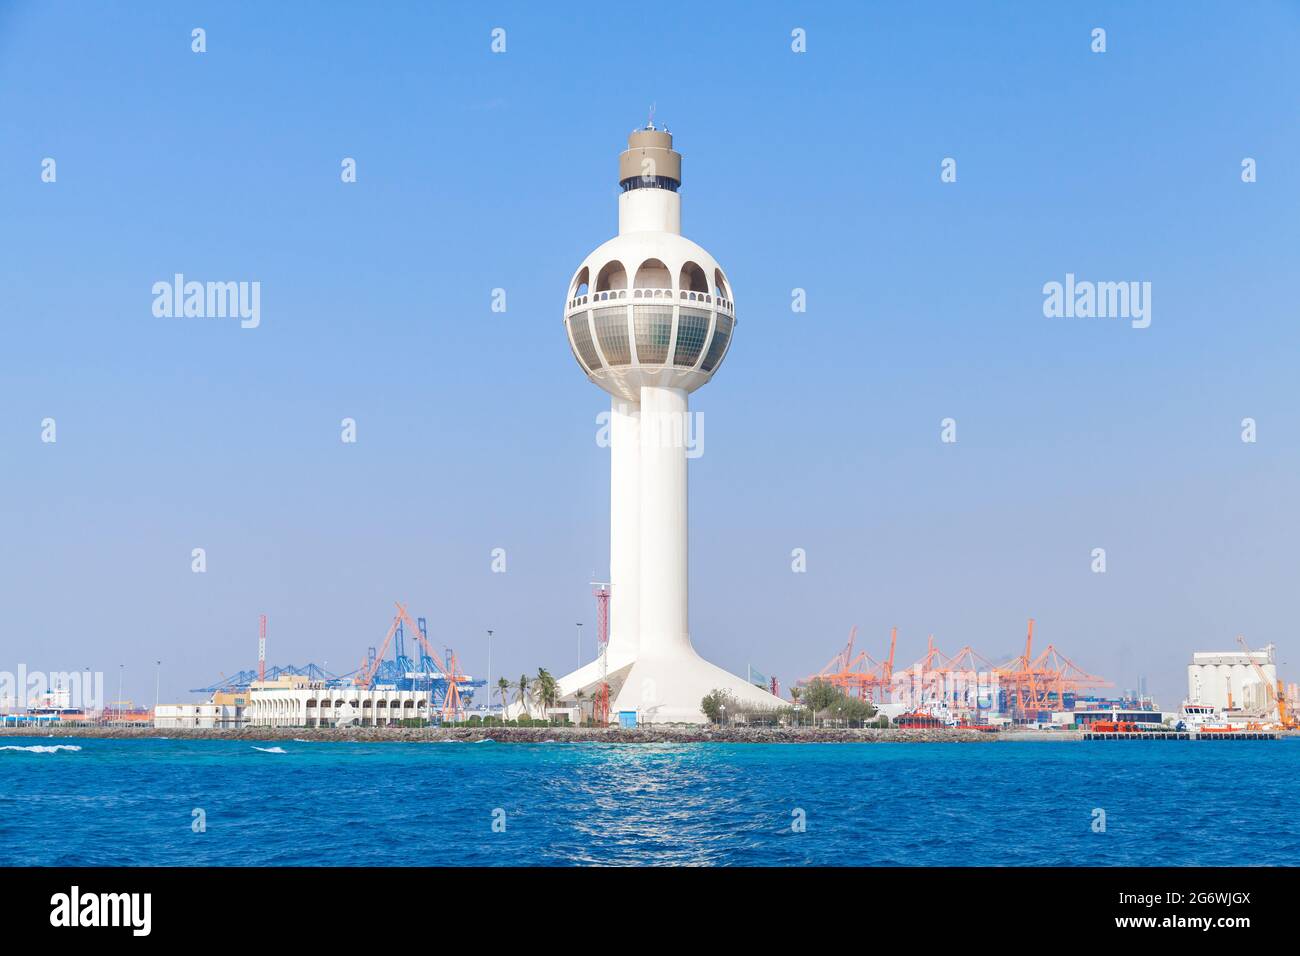 White traffic control tower as a main landmark and a symbol of the port of Jeddah, Saudi Arabia Stock Photo